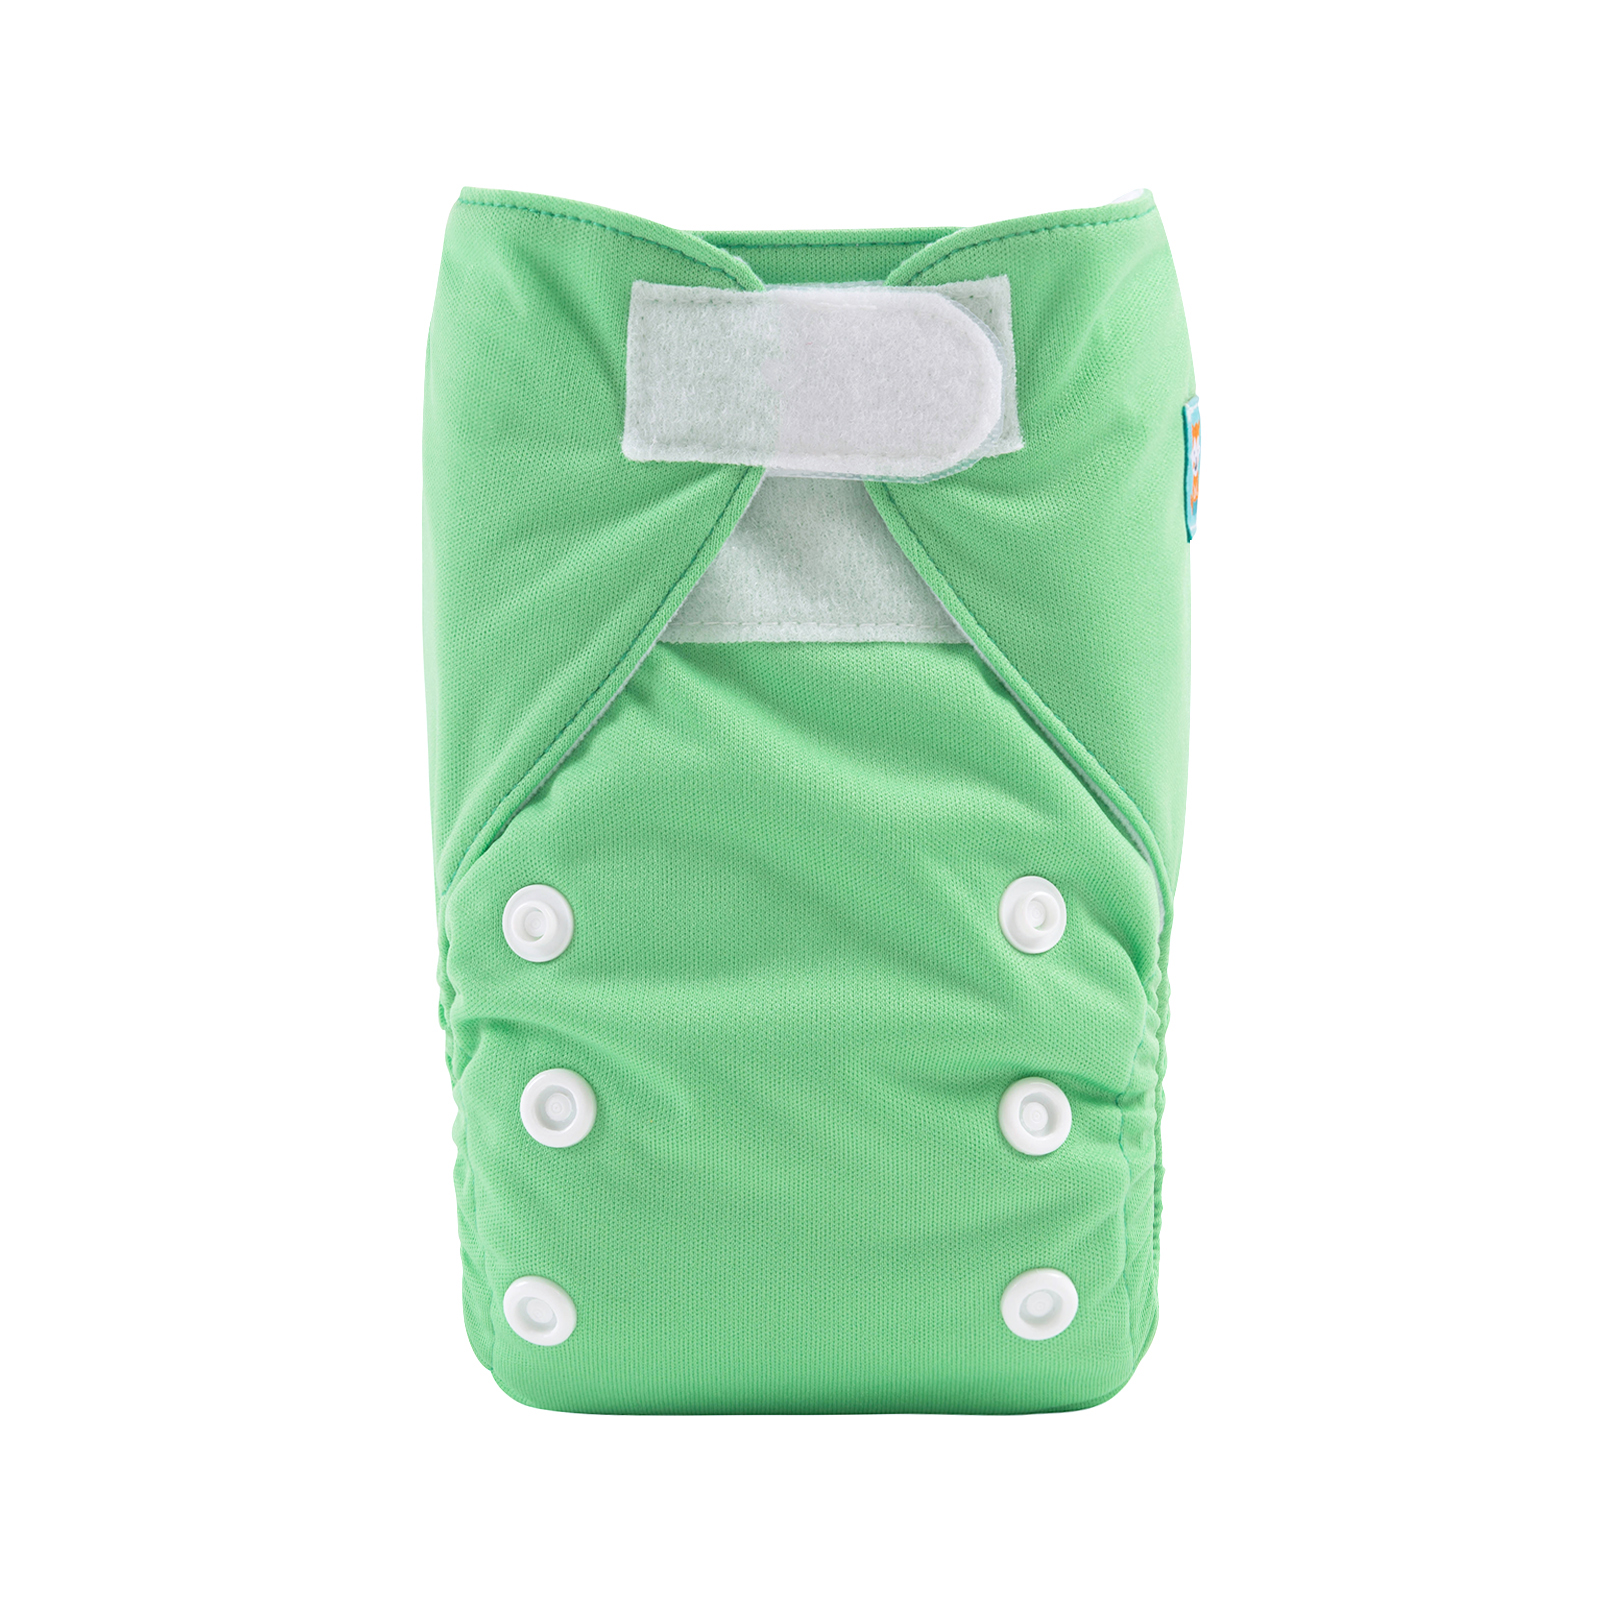 Ruggable-Pad - , Kids & Cloth Diapers & Going Green